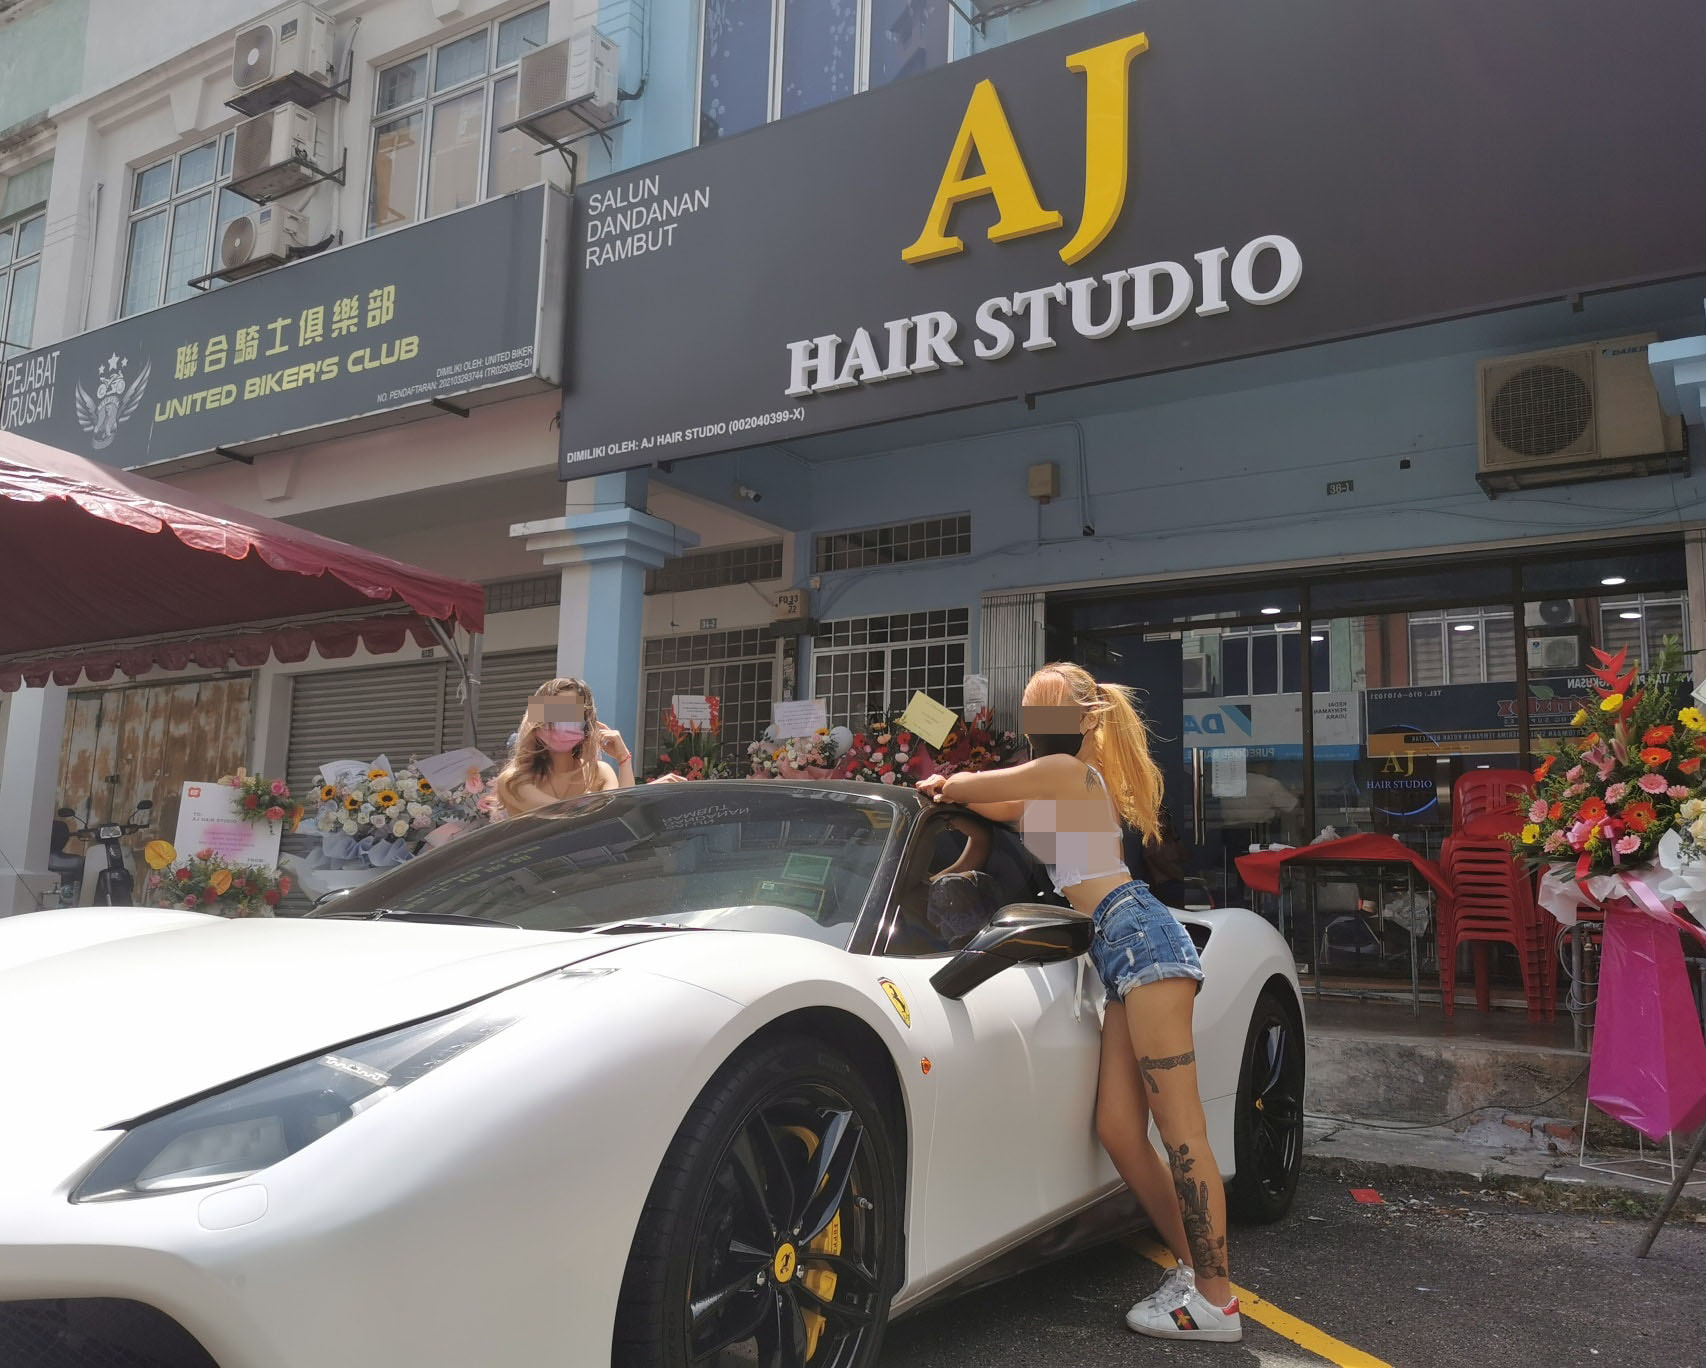 AJ Hair Studio landed themselves in hot water after using scantily-clad Thai models to promote their grand opening. Image credit: 十强